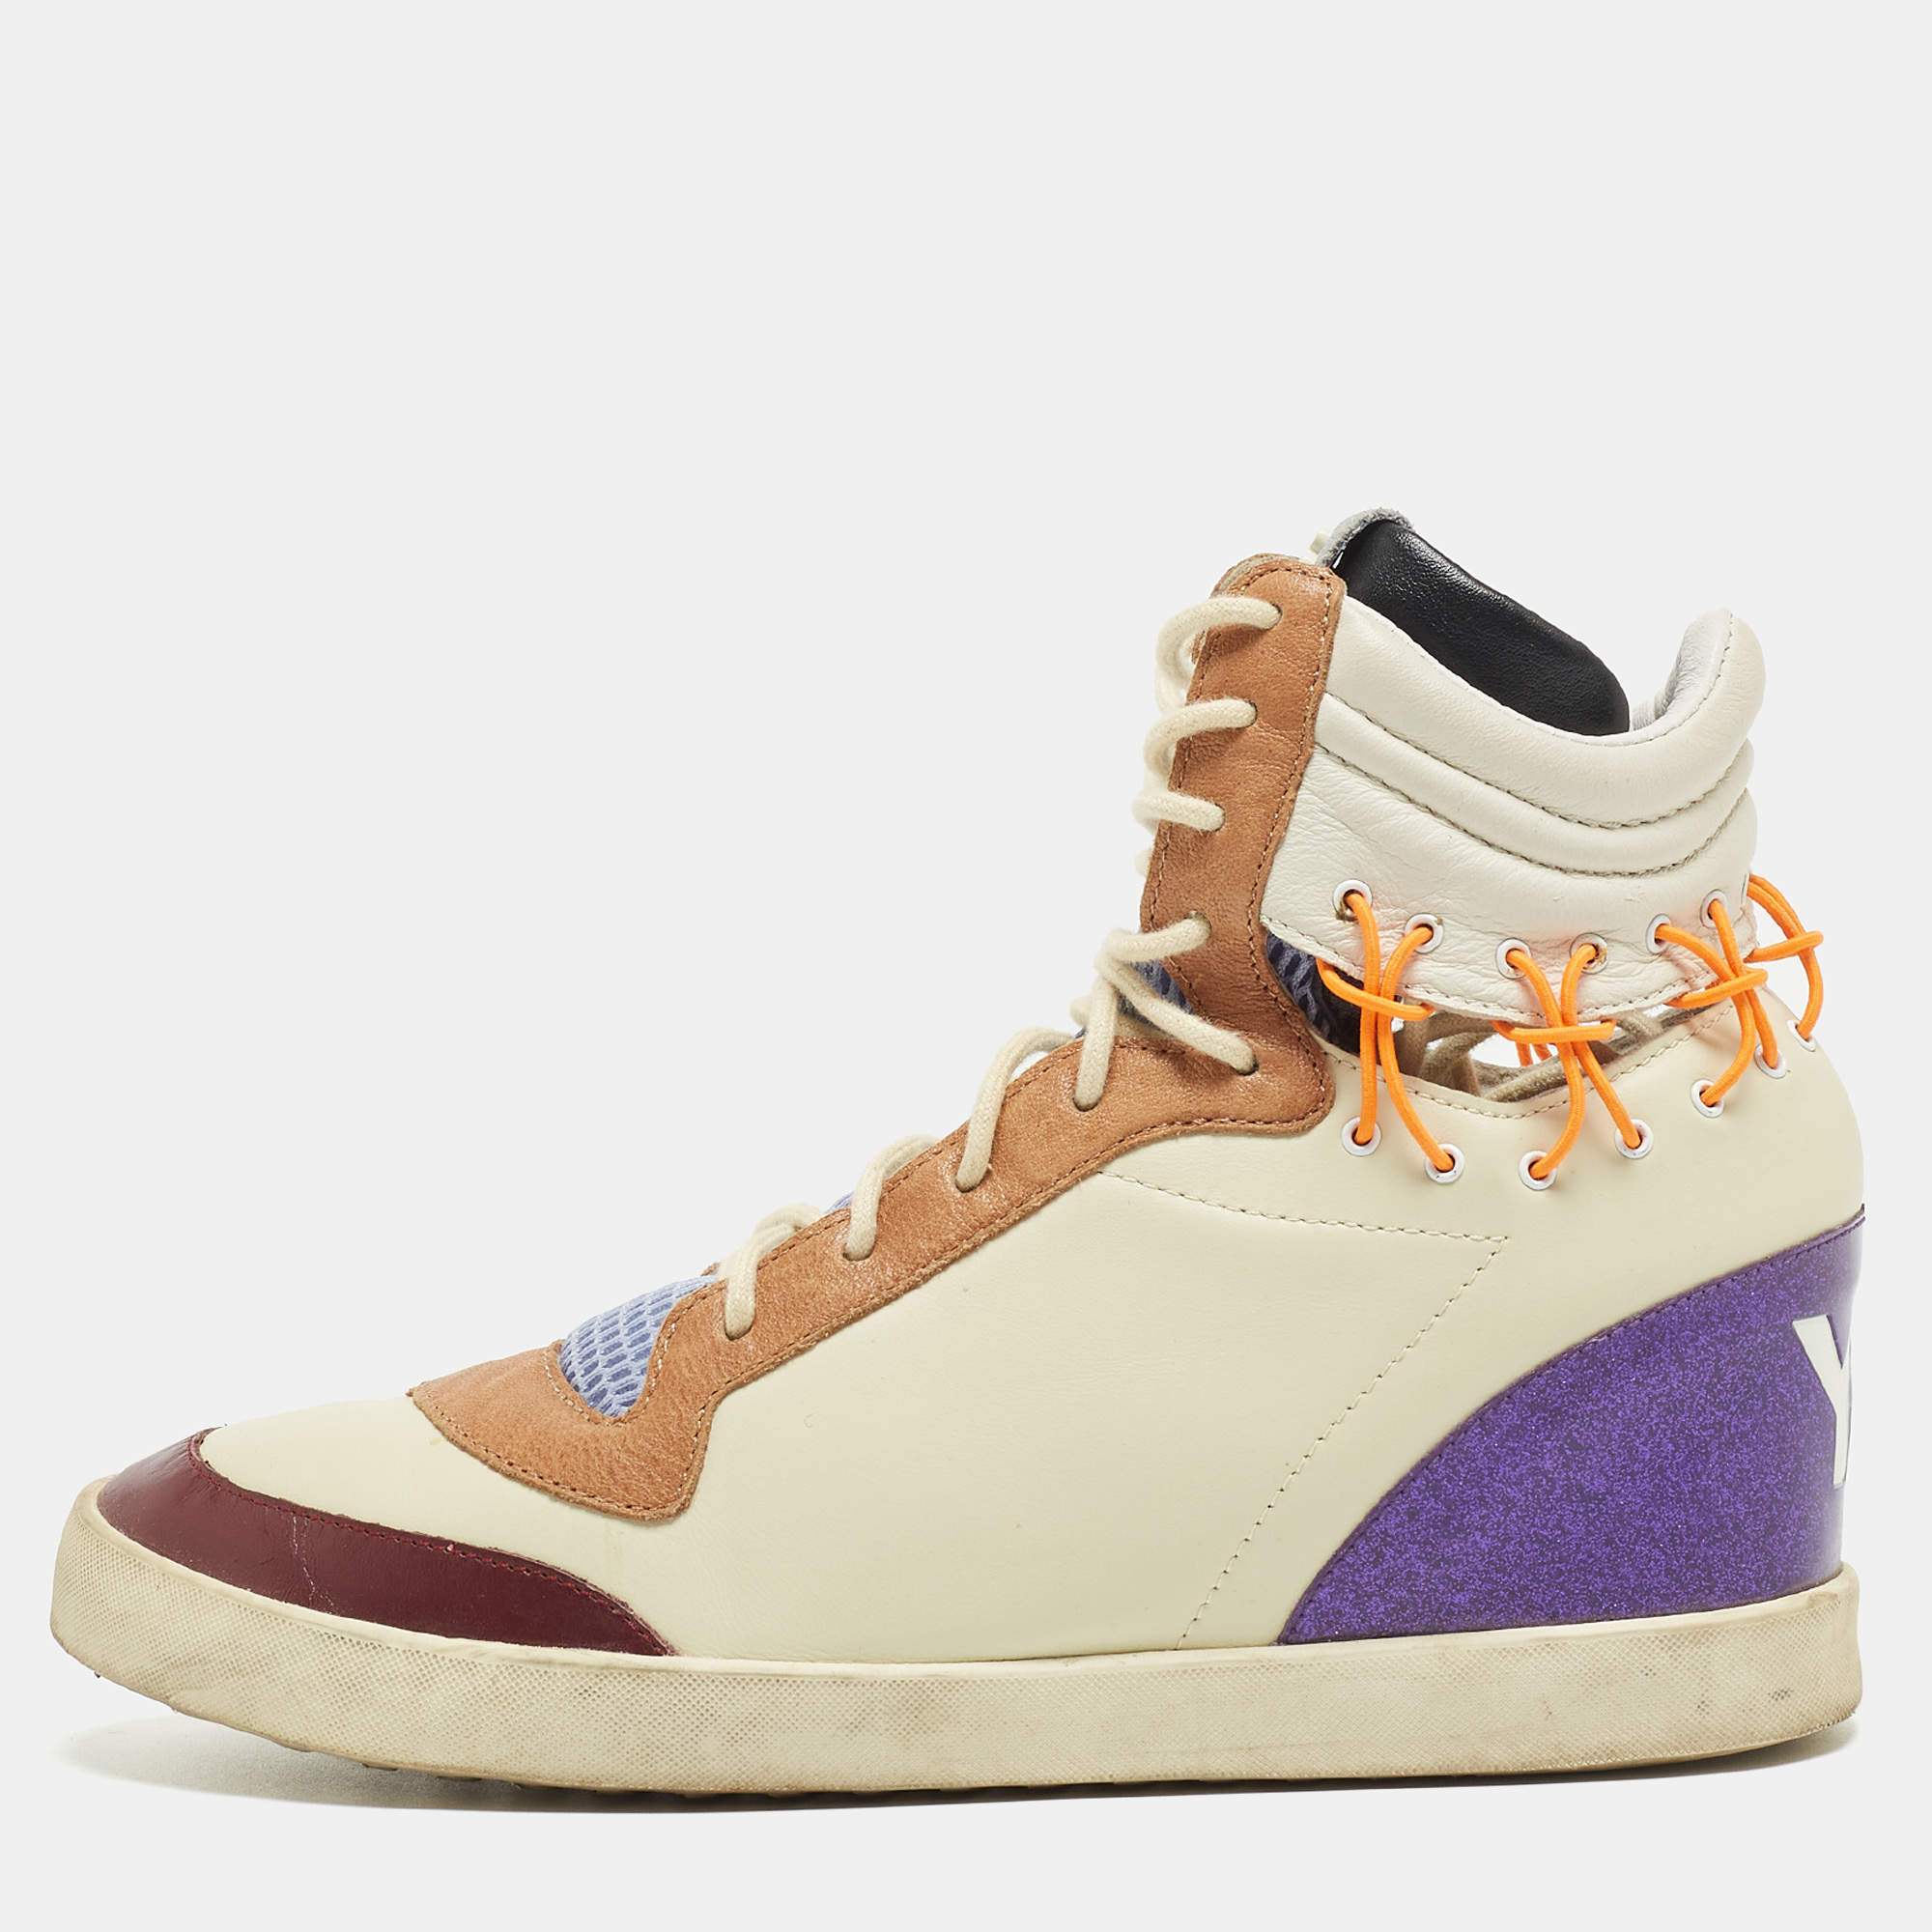 Y3 x Adidas By Raf Simons Multicolor Leather High Top Sneakers